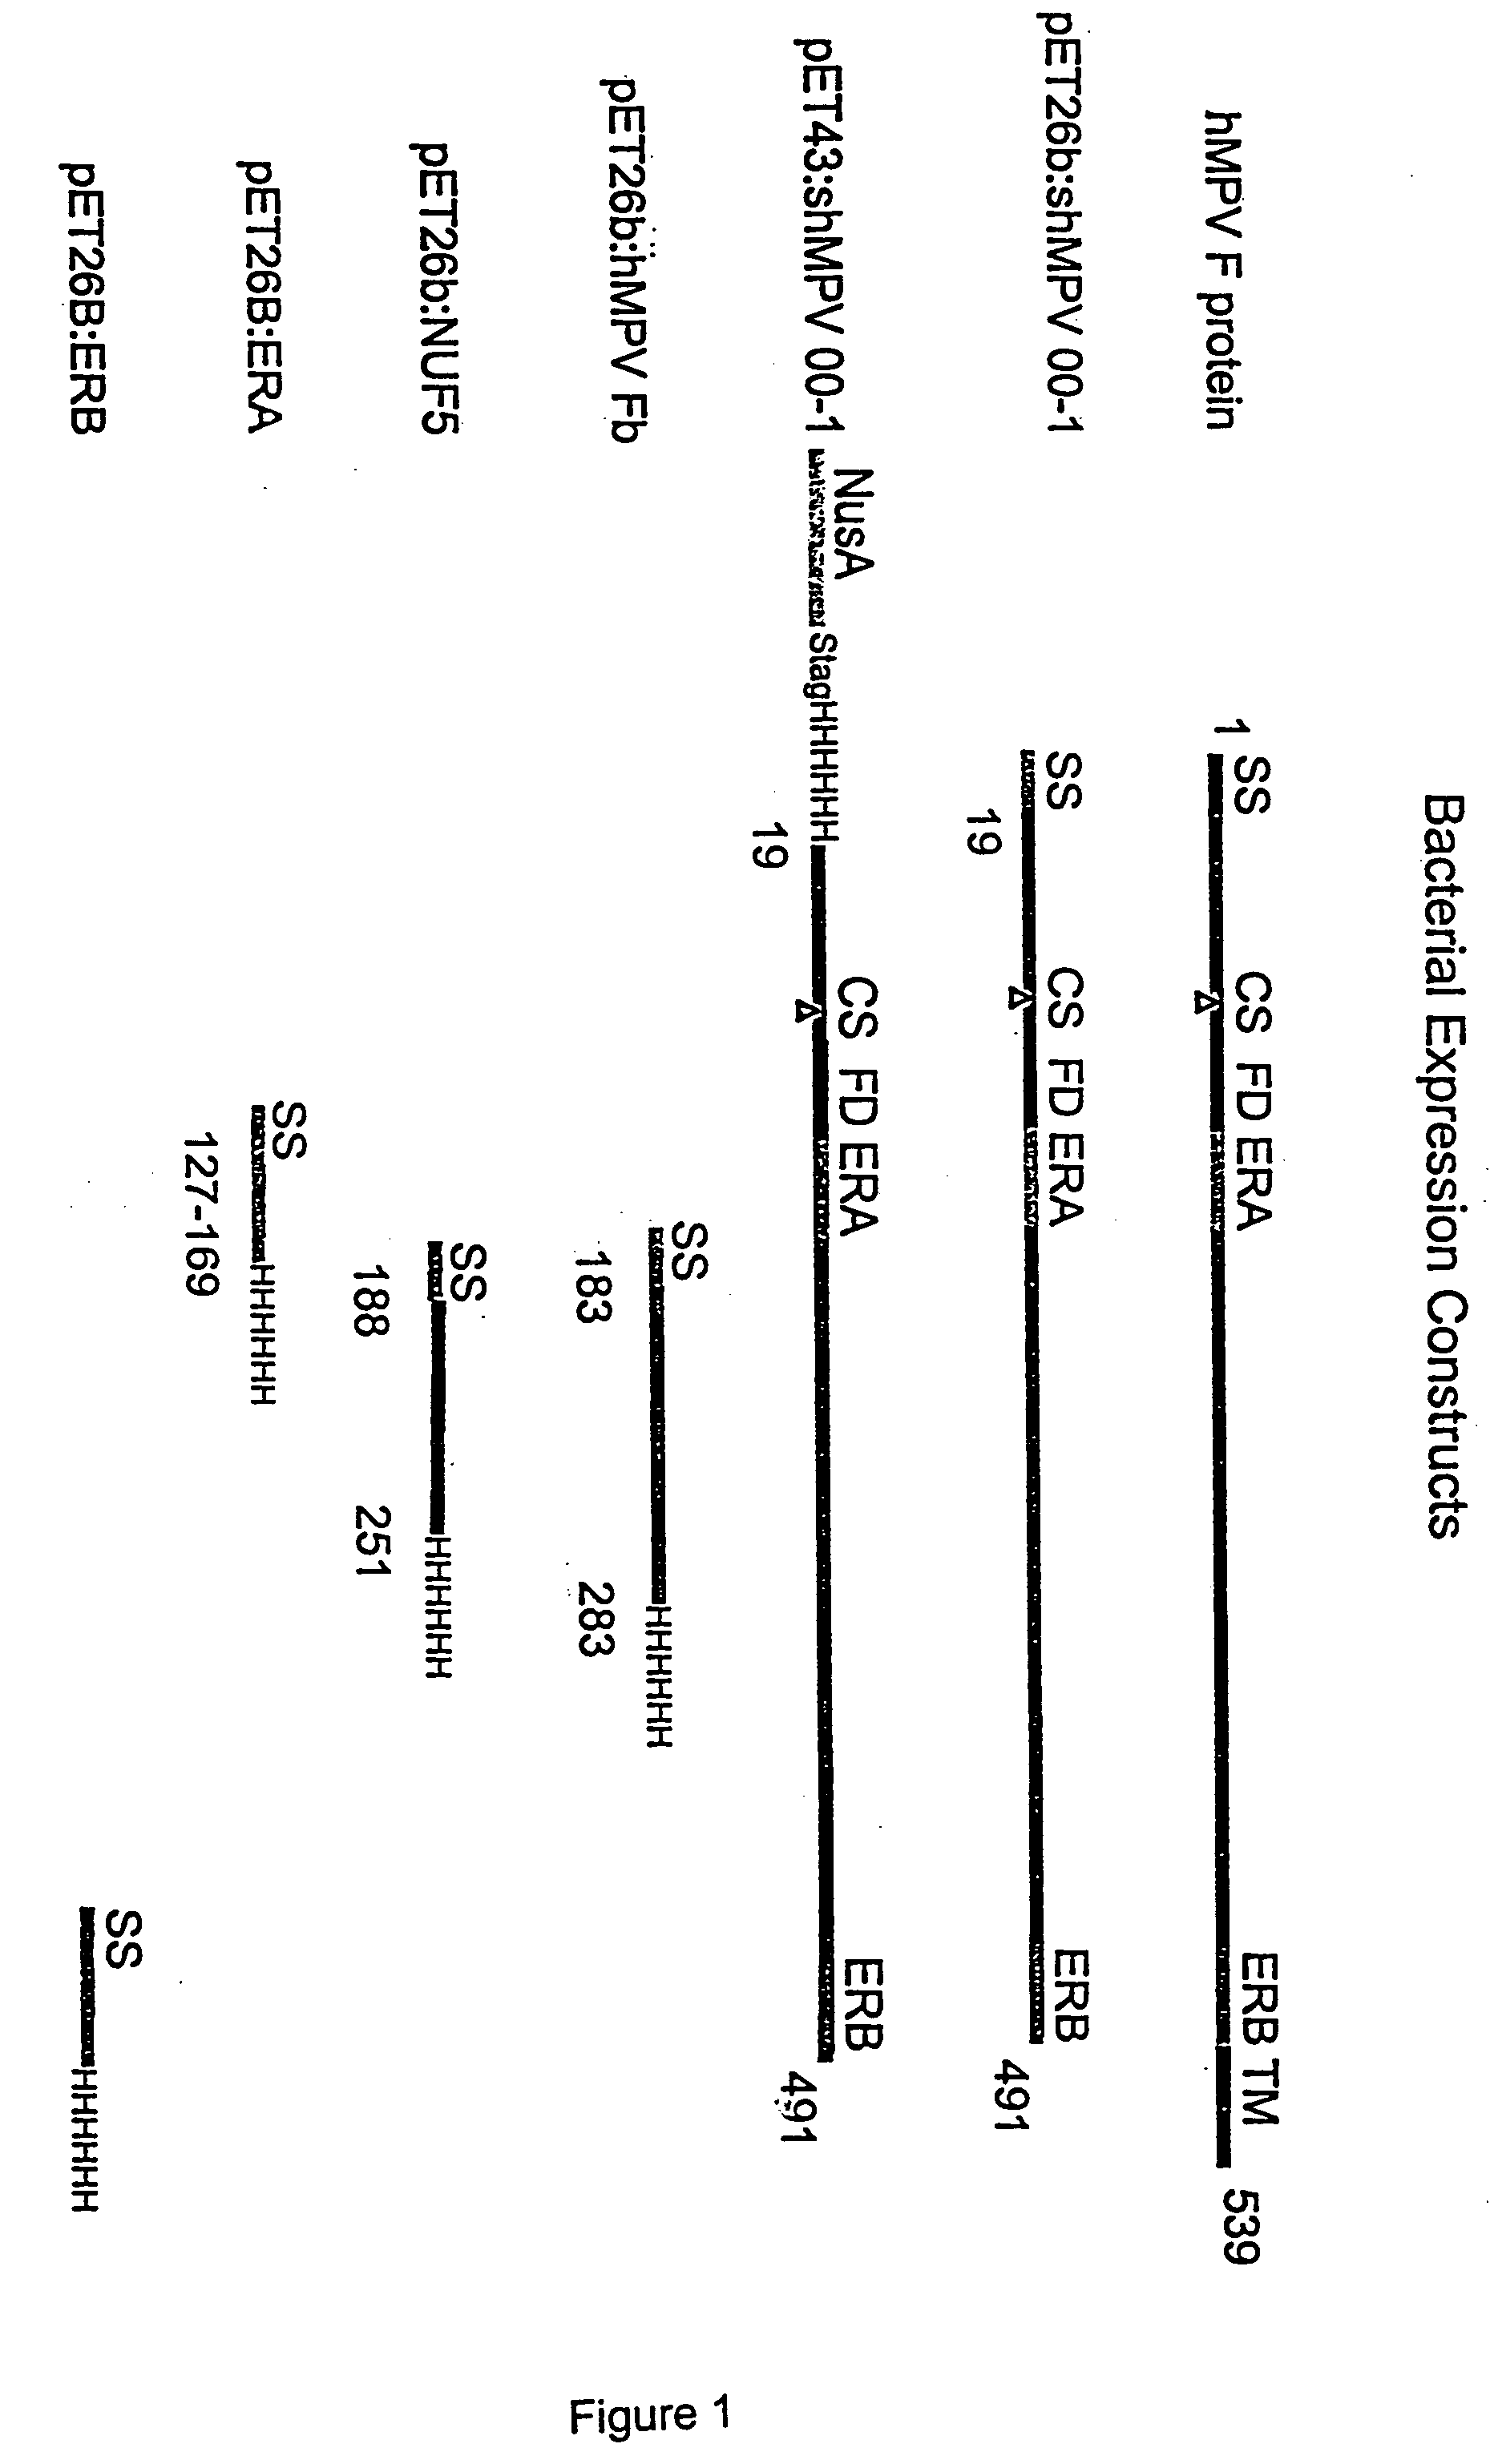 Methods of treating and preventing RSV, hMPV, and PIV using anti-RSV, anti-hMPV, and anti-PIV antibodies